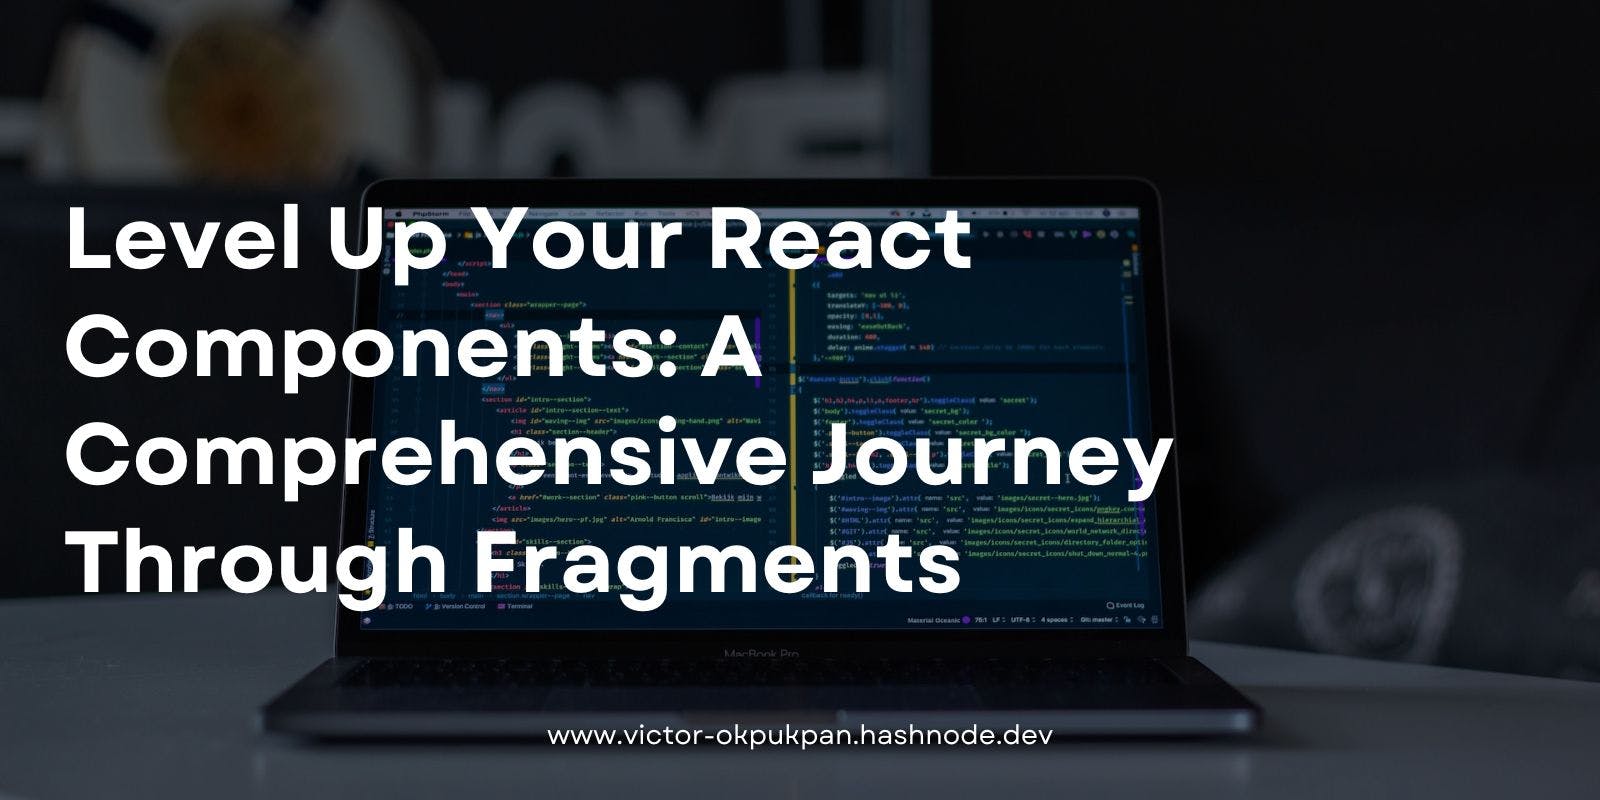 Level Up Your React Components: A Comprehensive Journey Through Fragments